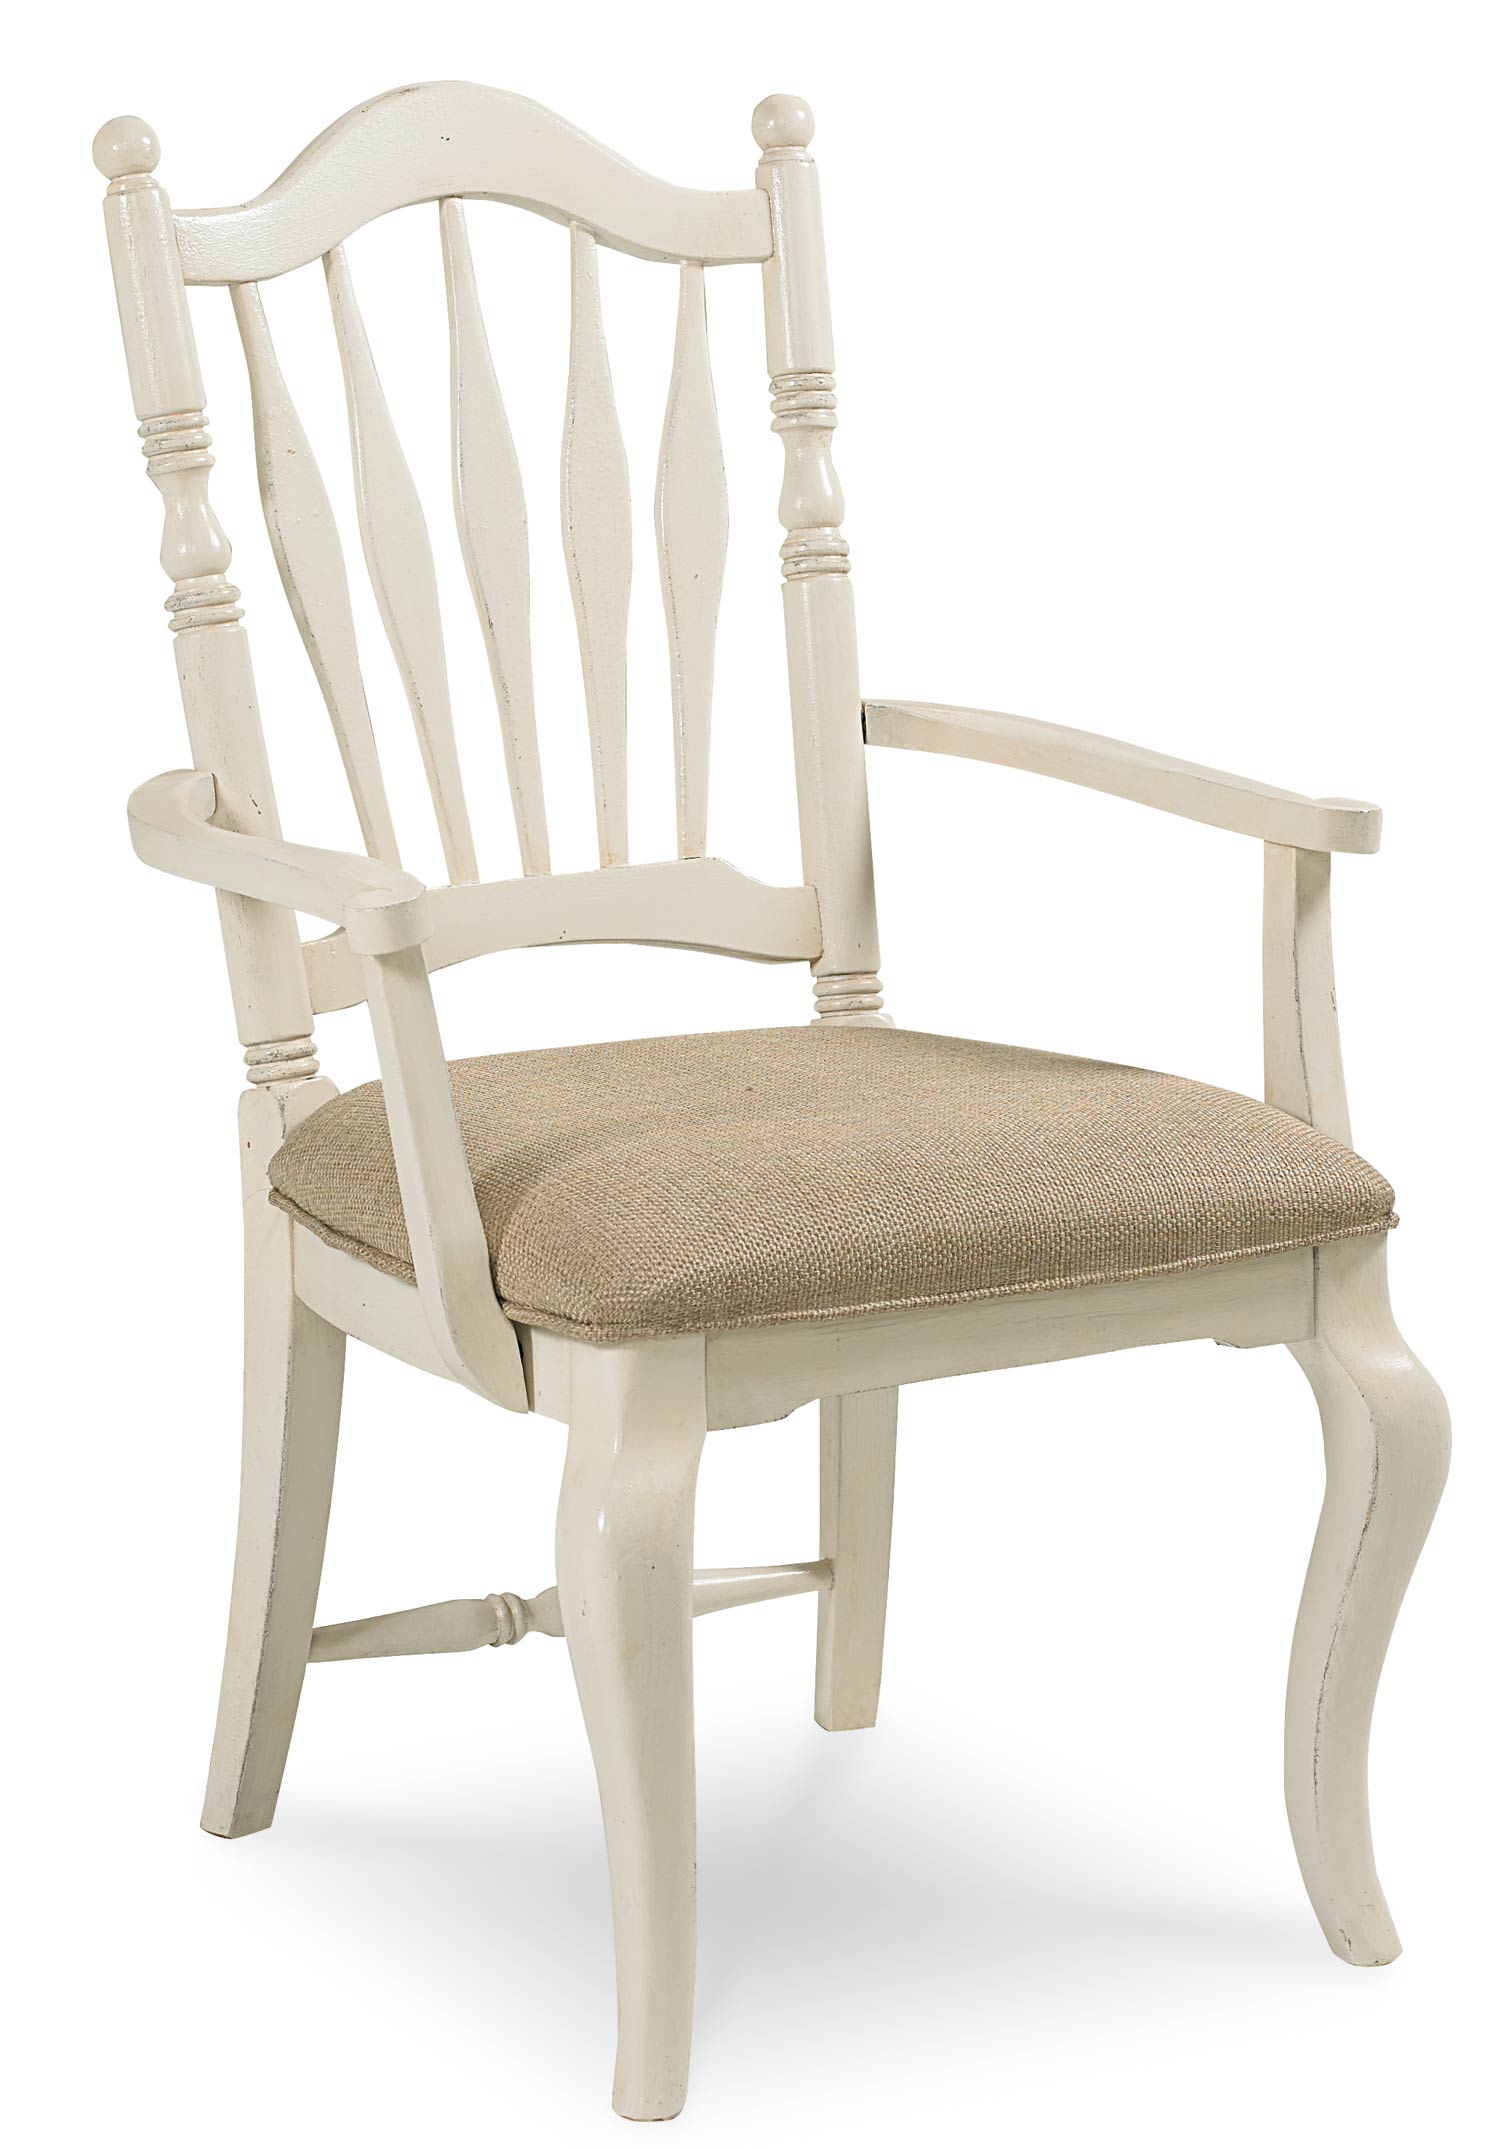 Legacy Classic Haven Sheaf Back Arm Chair - Buttercream White/Slight Distressing